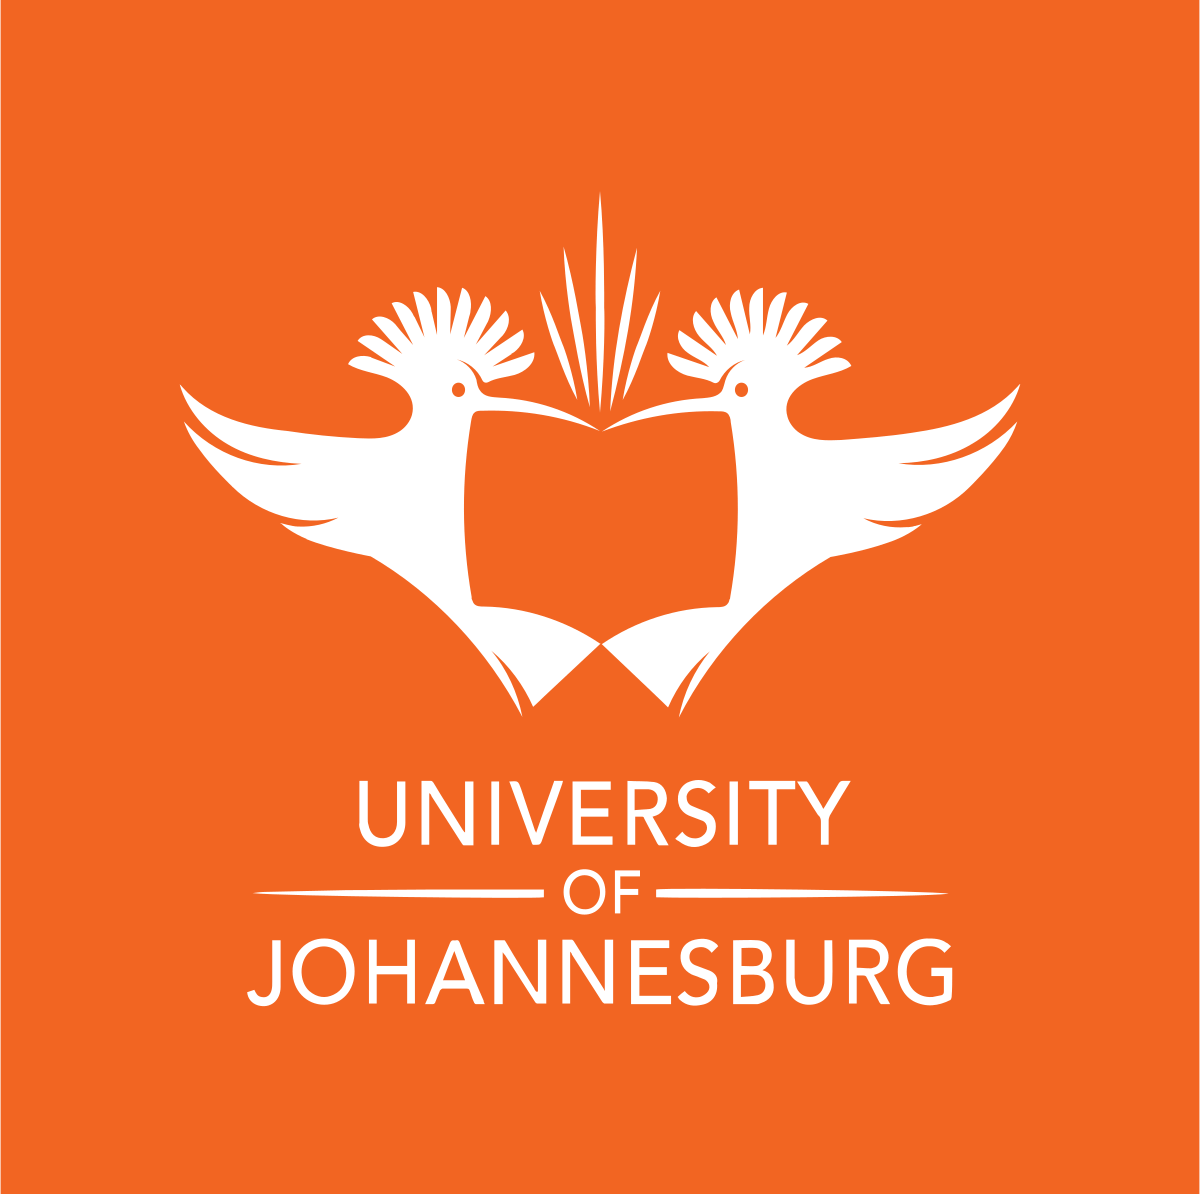 How To Apply University Of Johannesburg Online, Courses & Contact Details